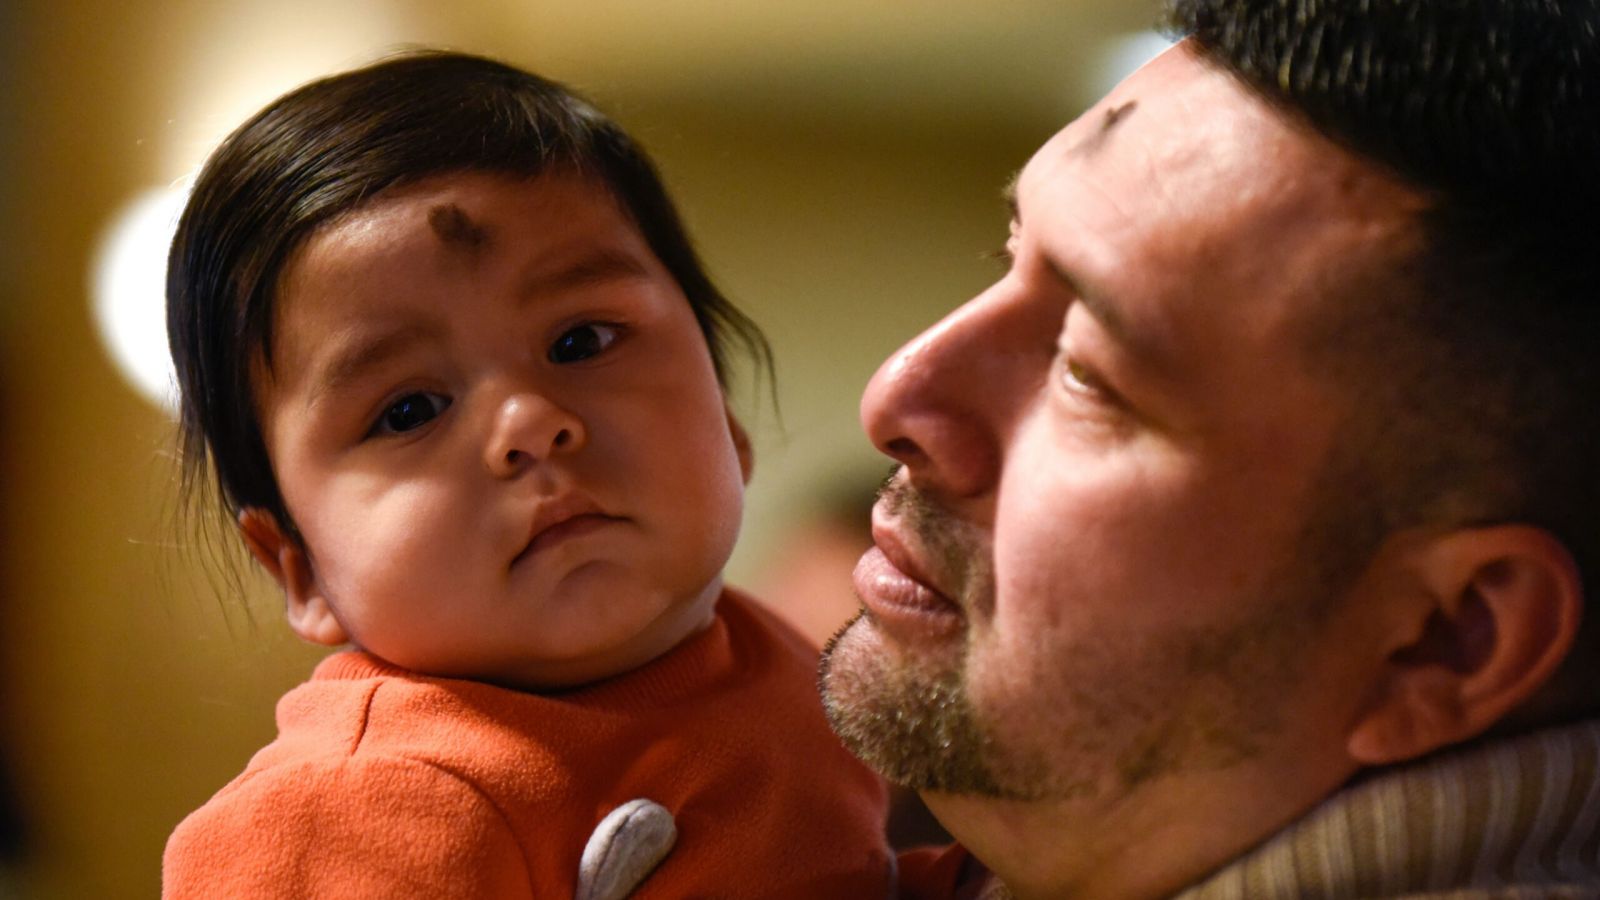 Juan Flores, right, holds his 8-month old child after his family received Ash during Ash Wednesday at Our Lady of Perpetual Help Parish in Dallas, Feb. 26, 2020. Ben Torres/Special Contributor